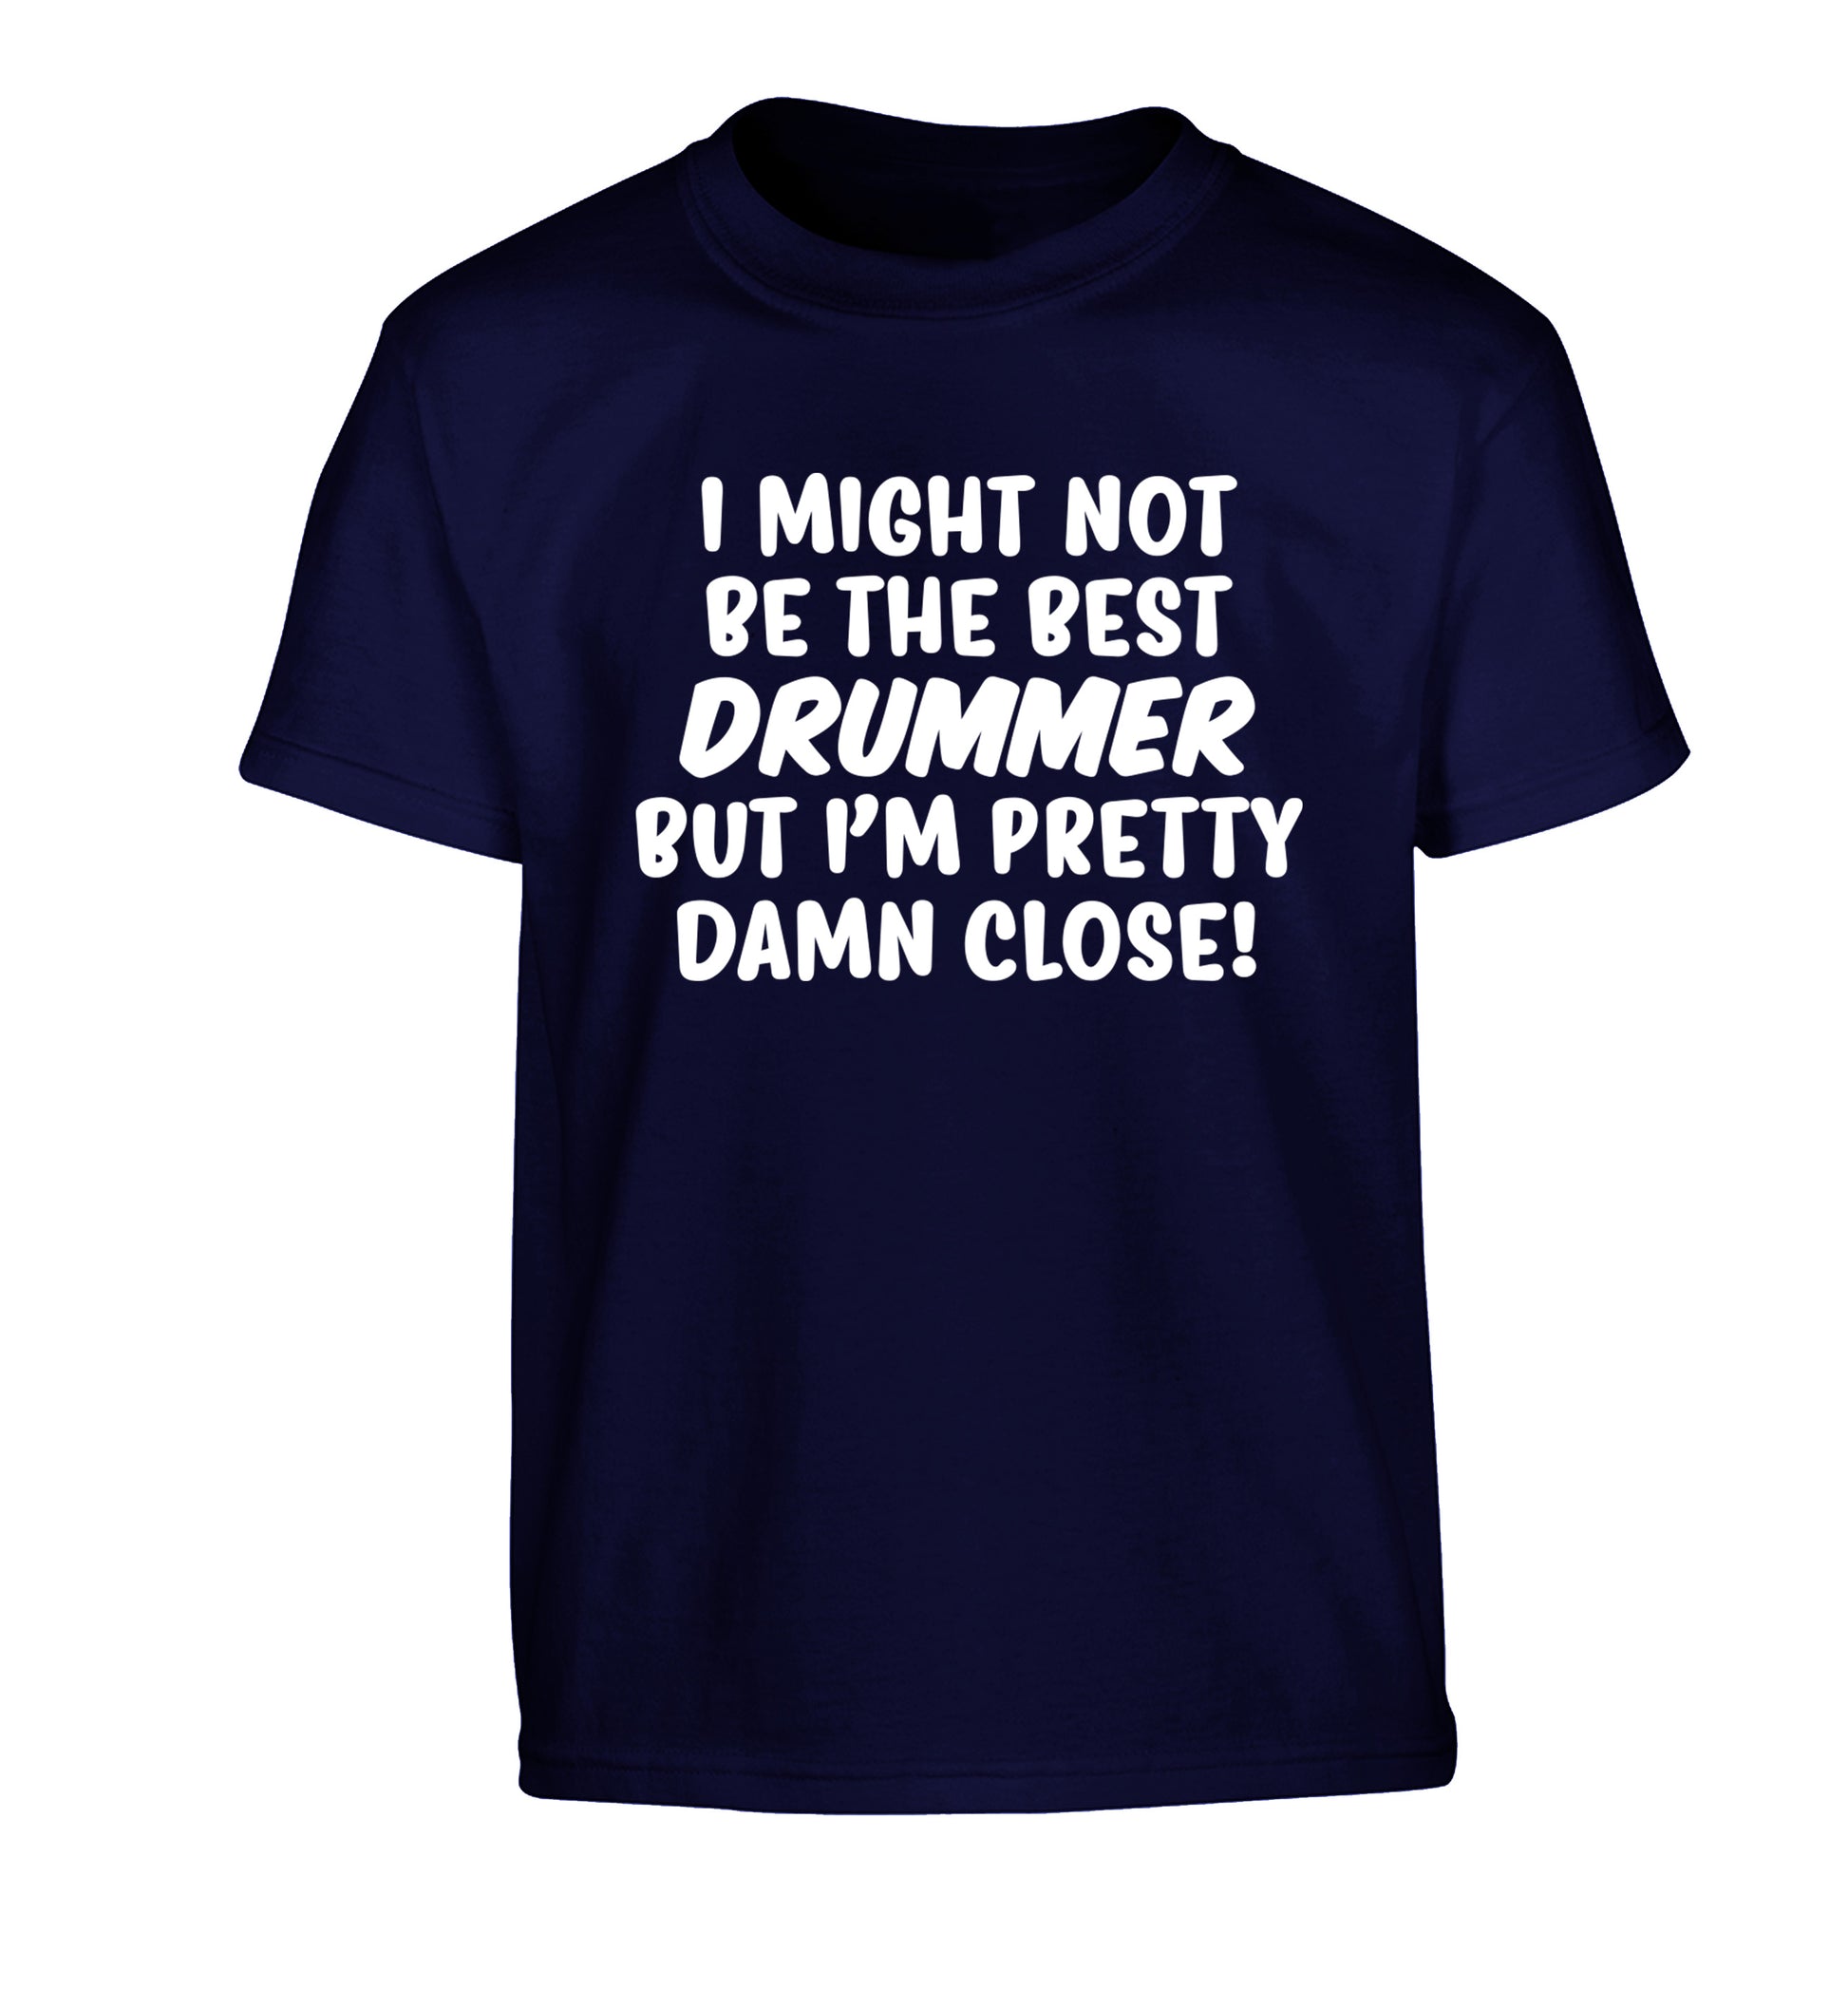 I might not be the best drummer but I'm pretty close! Children's navy Tshirt 12-14 Years